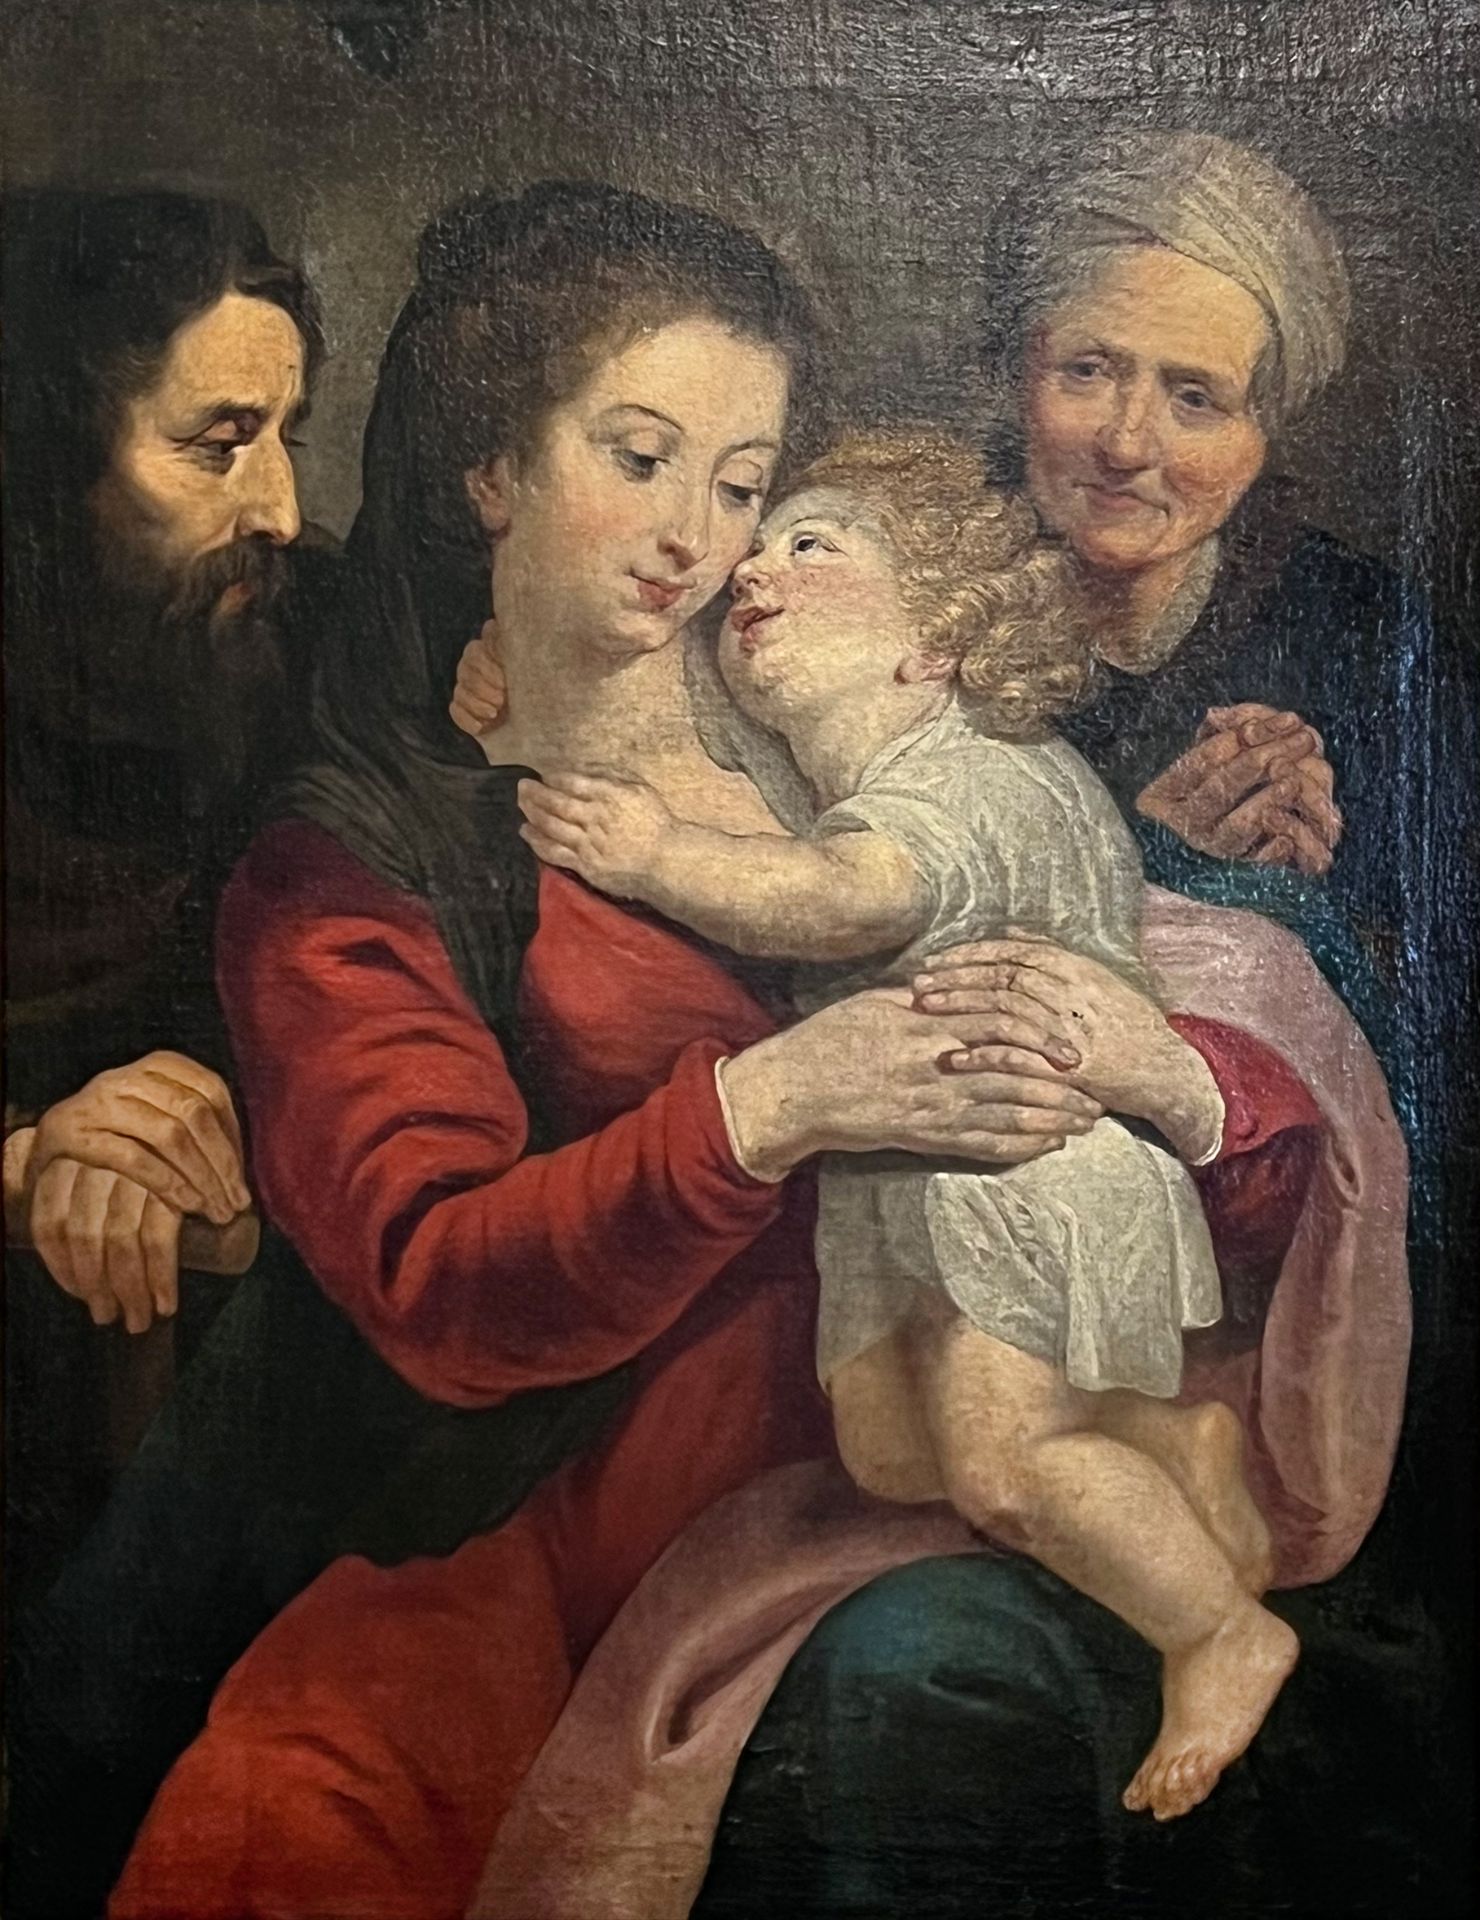 Peter Paul Rubens (1577 - 1640) Copy after. "The Holy Family with St Anne".